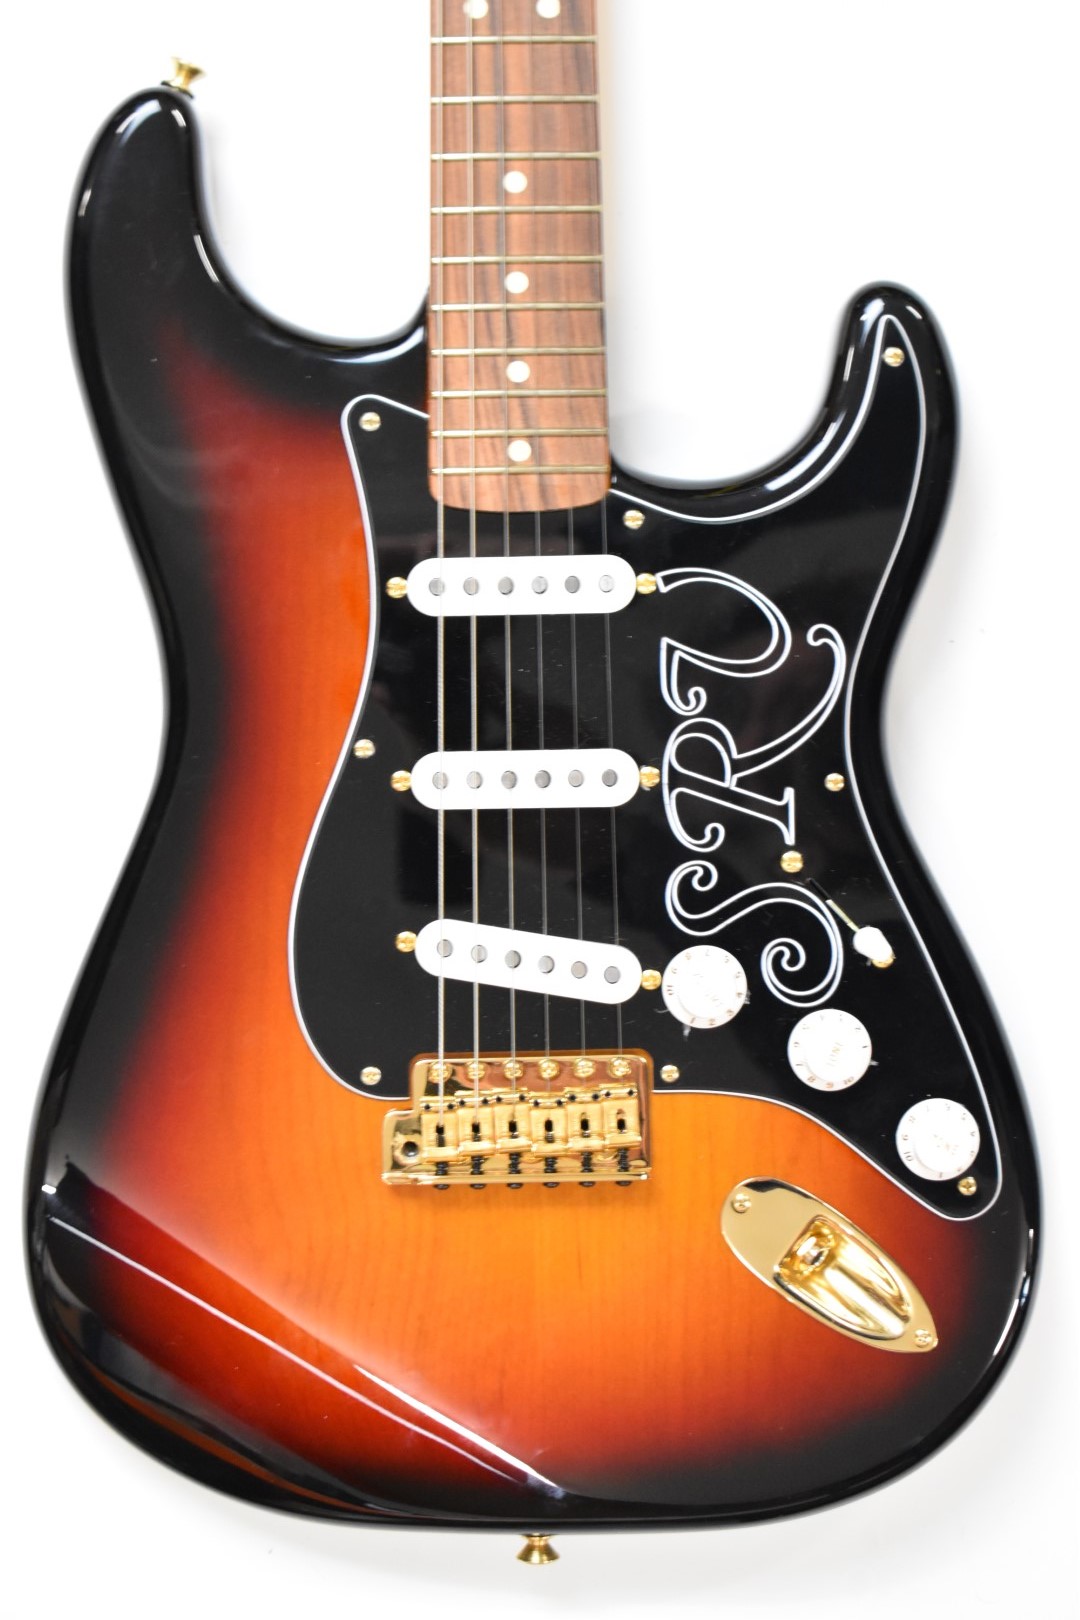 Fender Stevie Ray Vaughan SRV Signature Series Stratocaster electric guitar in 3 tone sunburst - Image 2 of 8